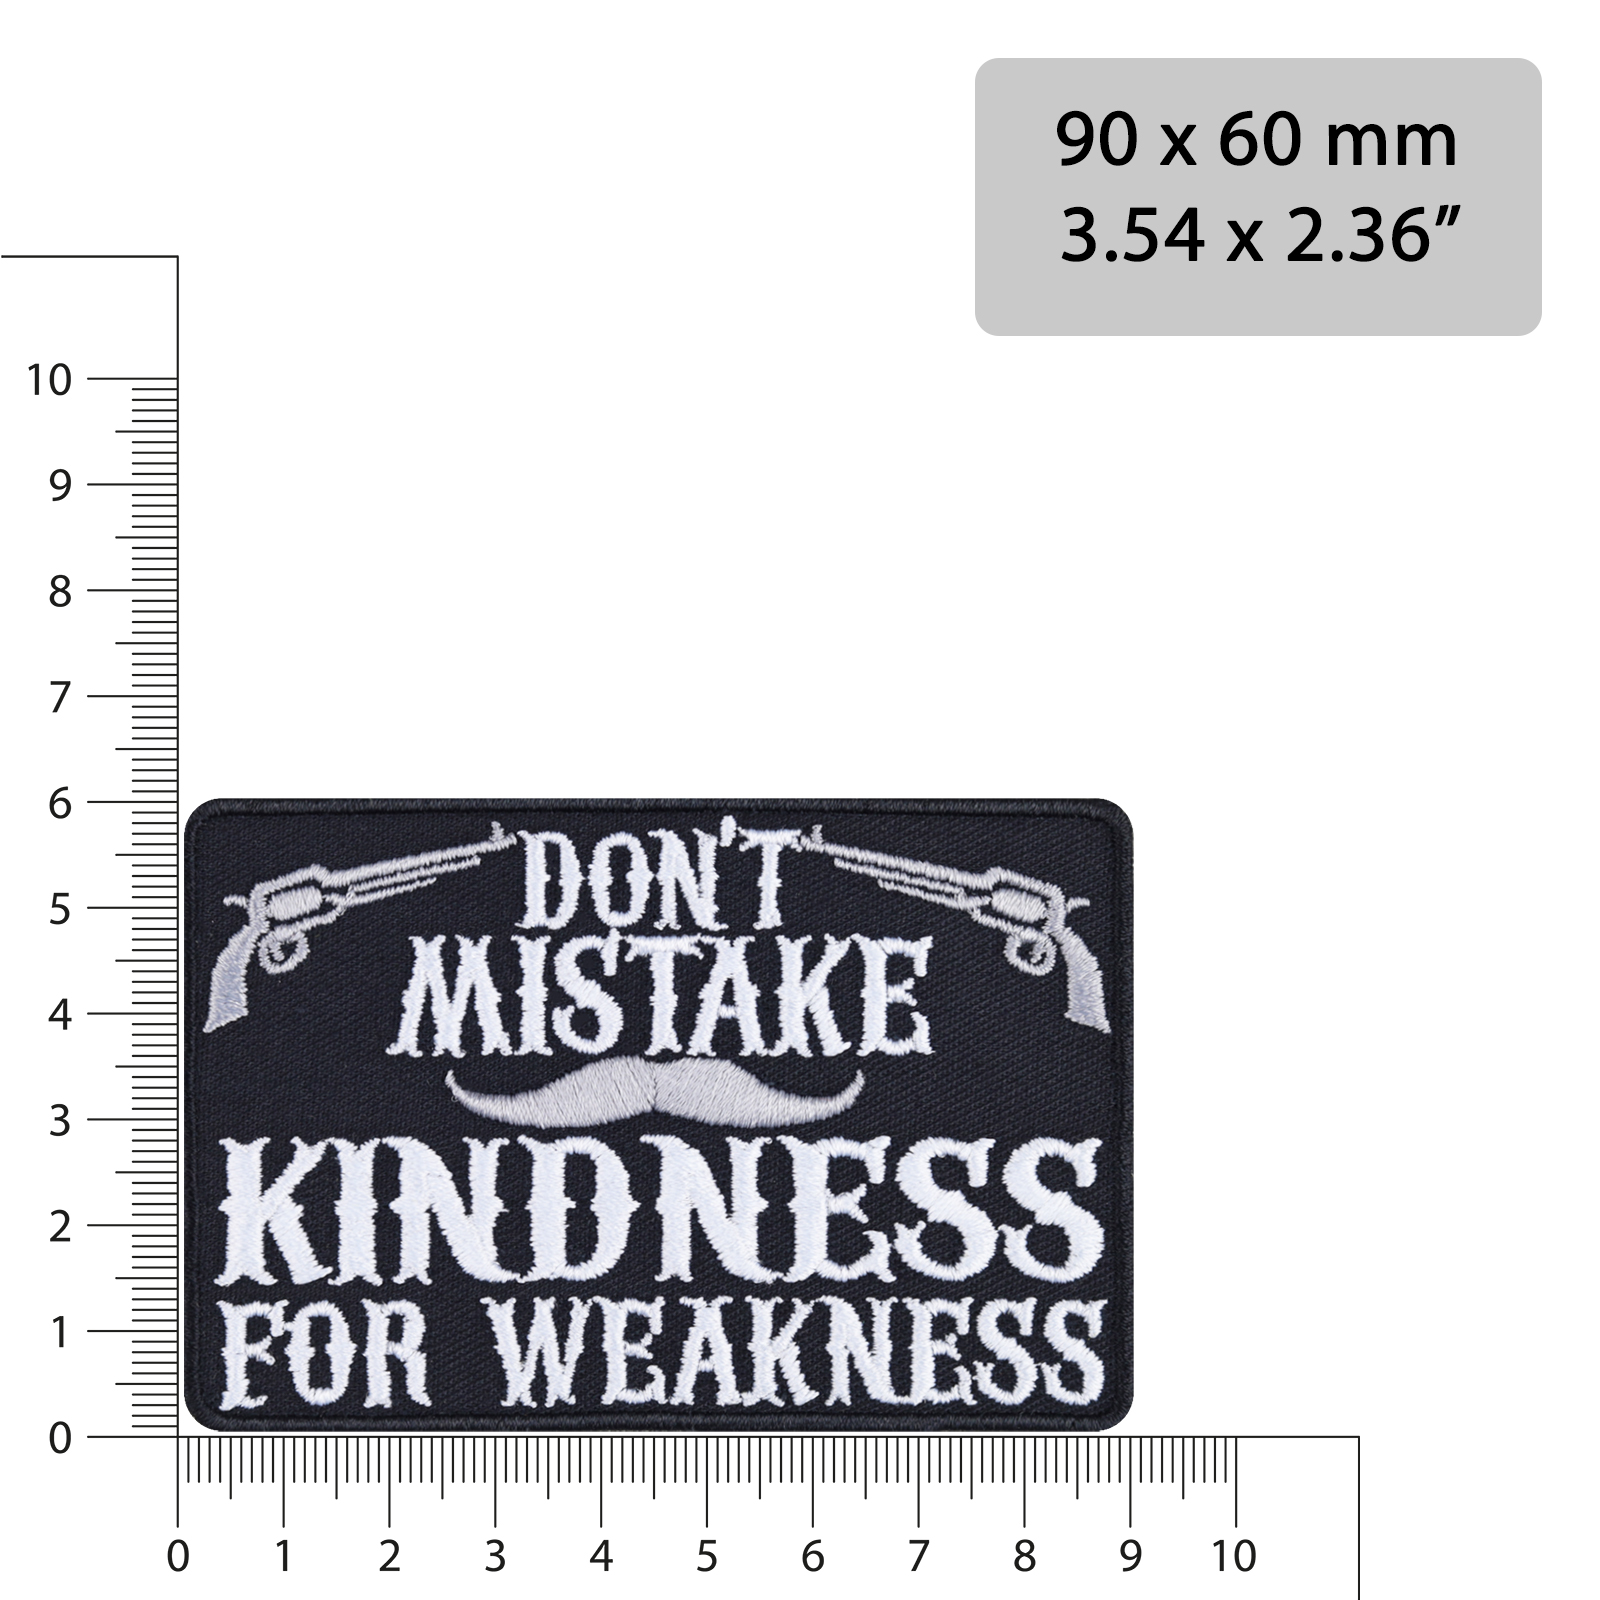 Don't mistake kindness for weakness - Patch